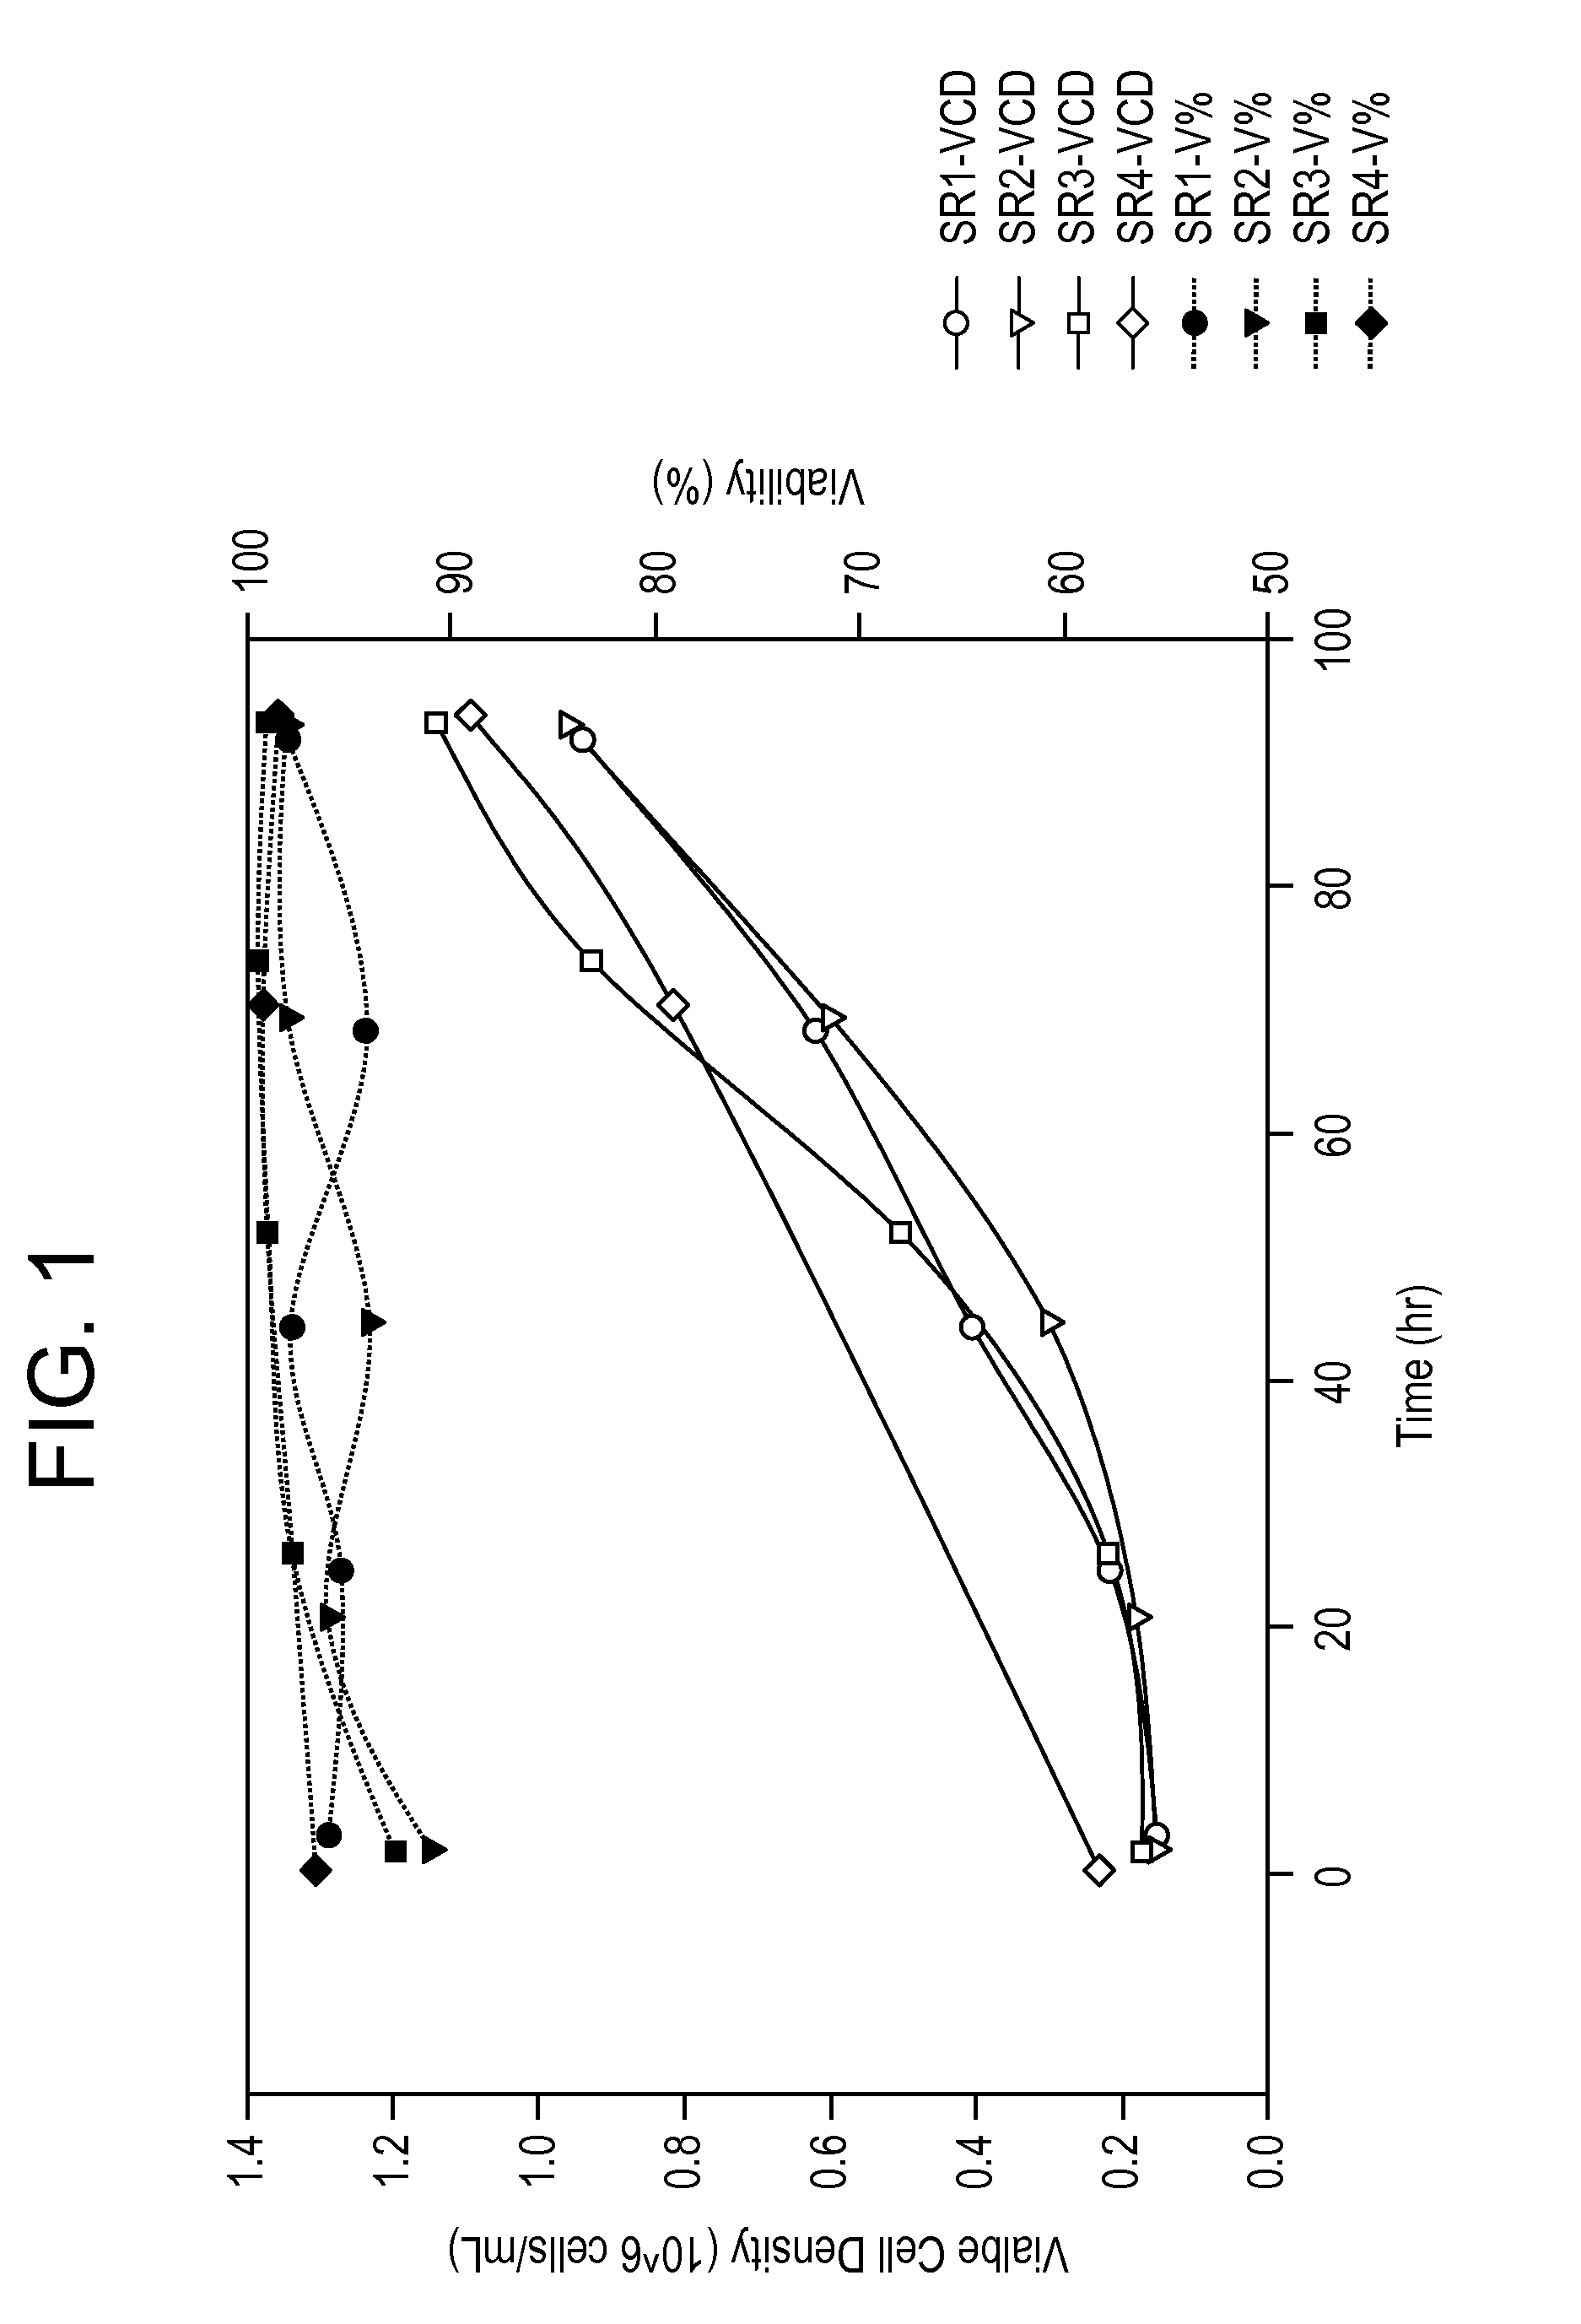 Methods for cultivating cells, propagating and purifying viruses